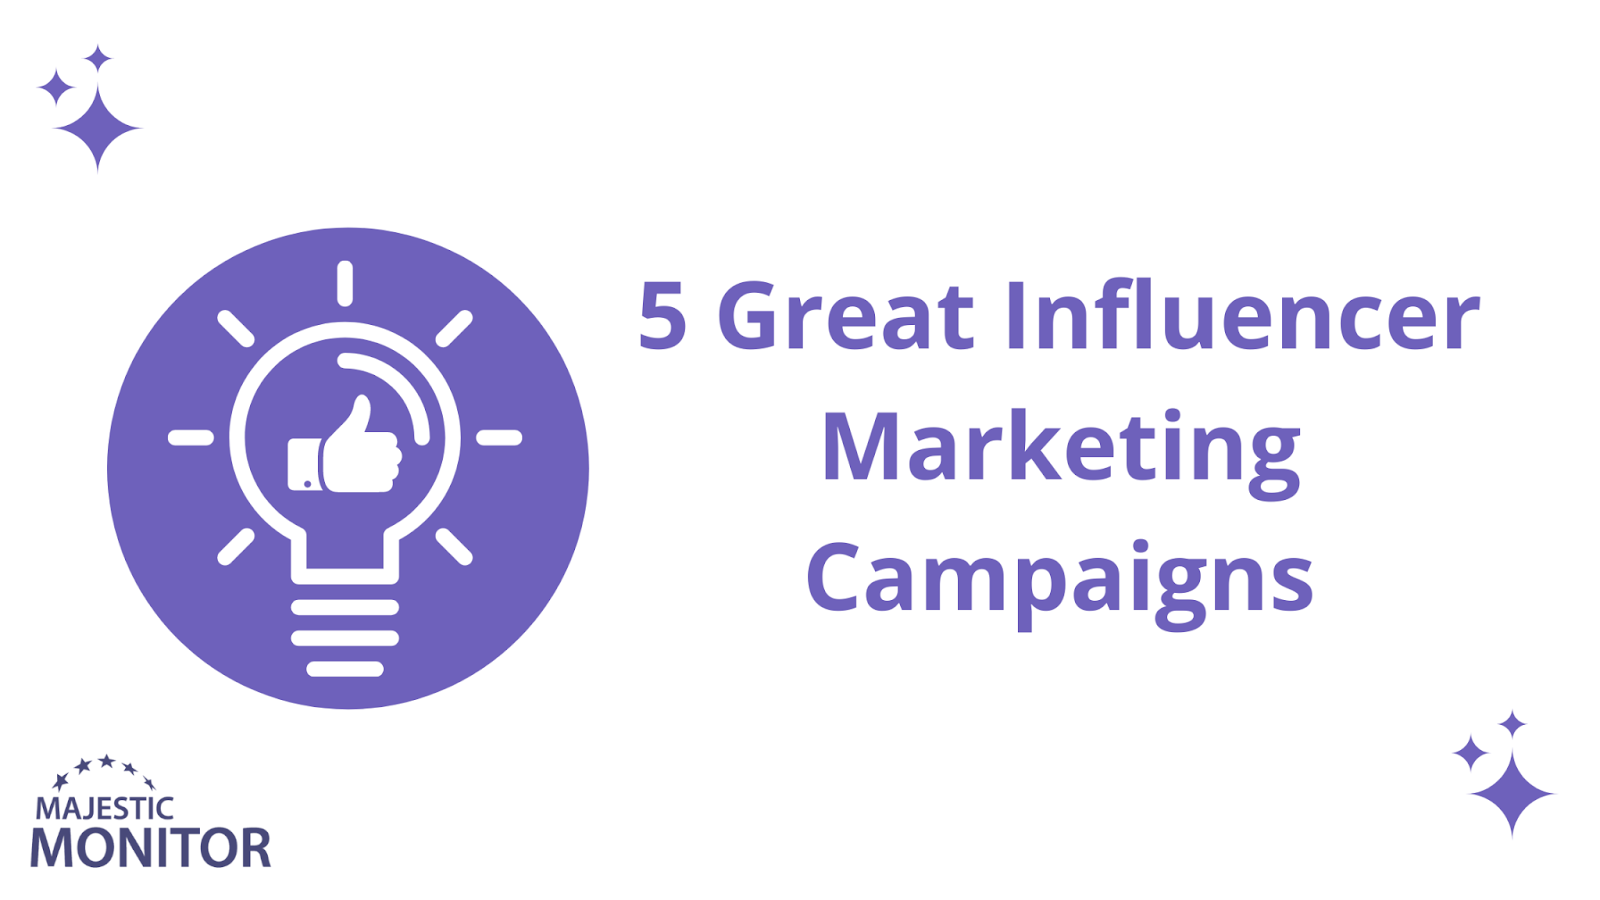 5 Stellar Influencer Marketing Campaigns to Inspire You